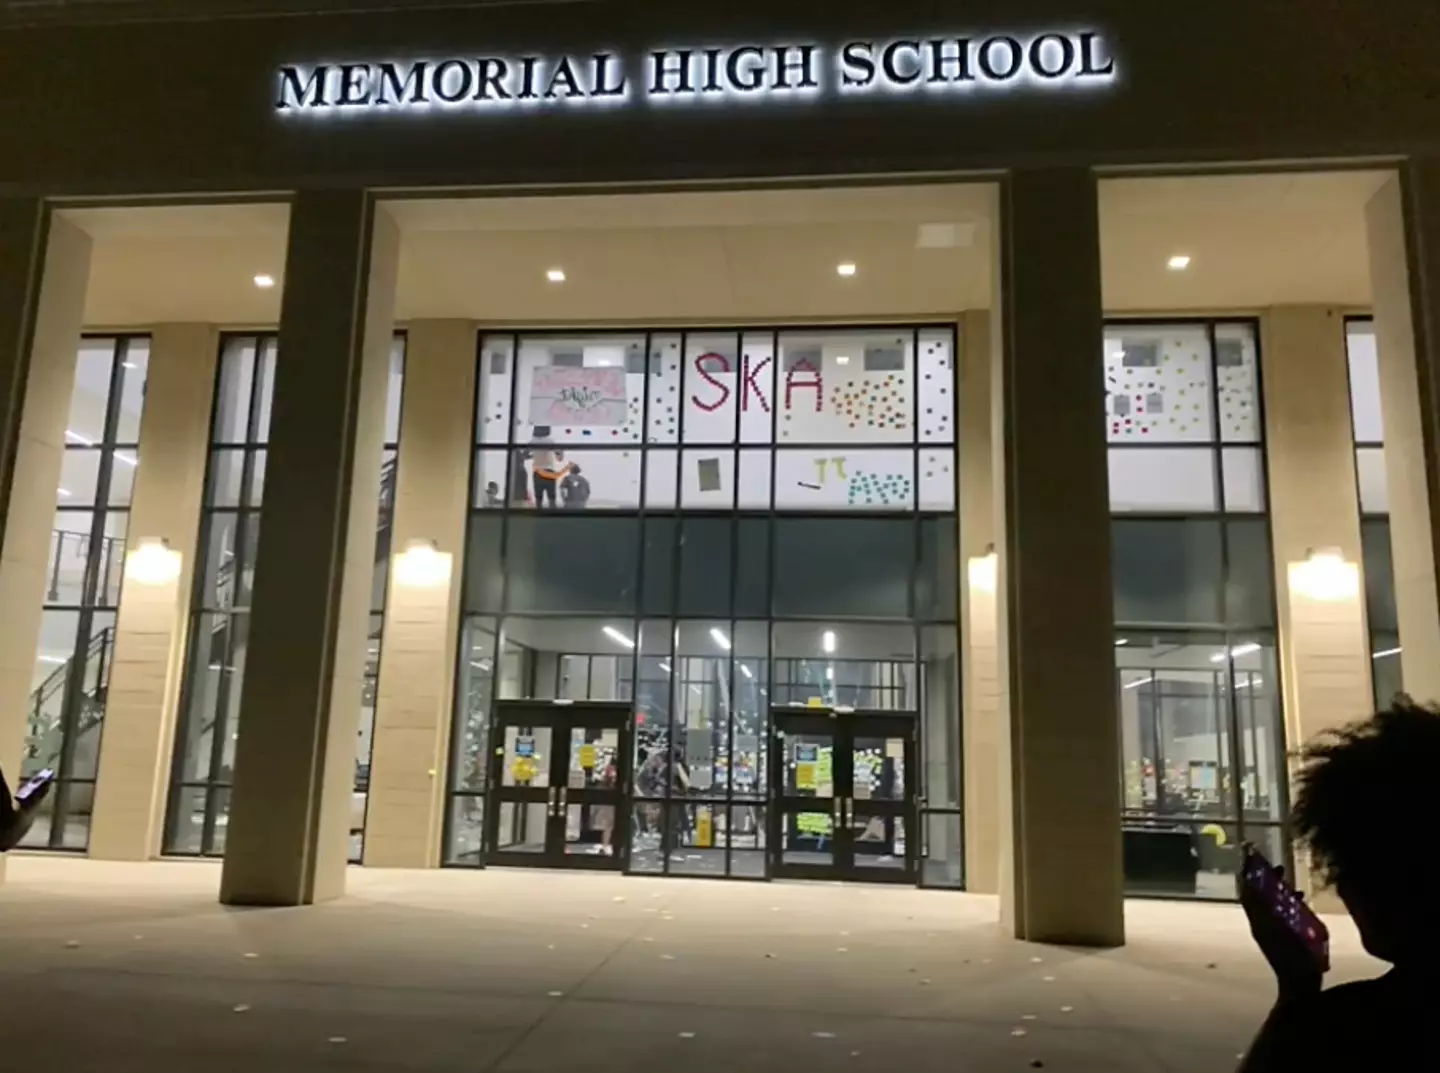 Officials from Memorial High School in Frisco are working with the police to identify those responsible.